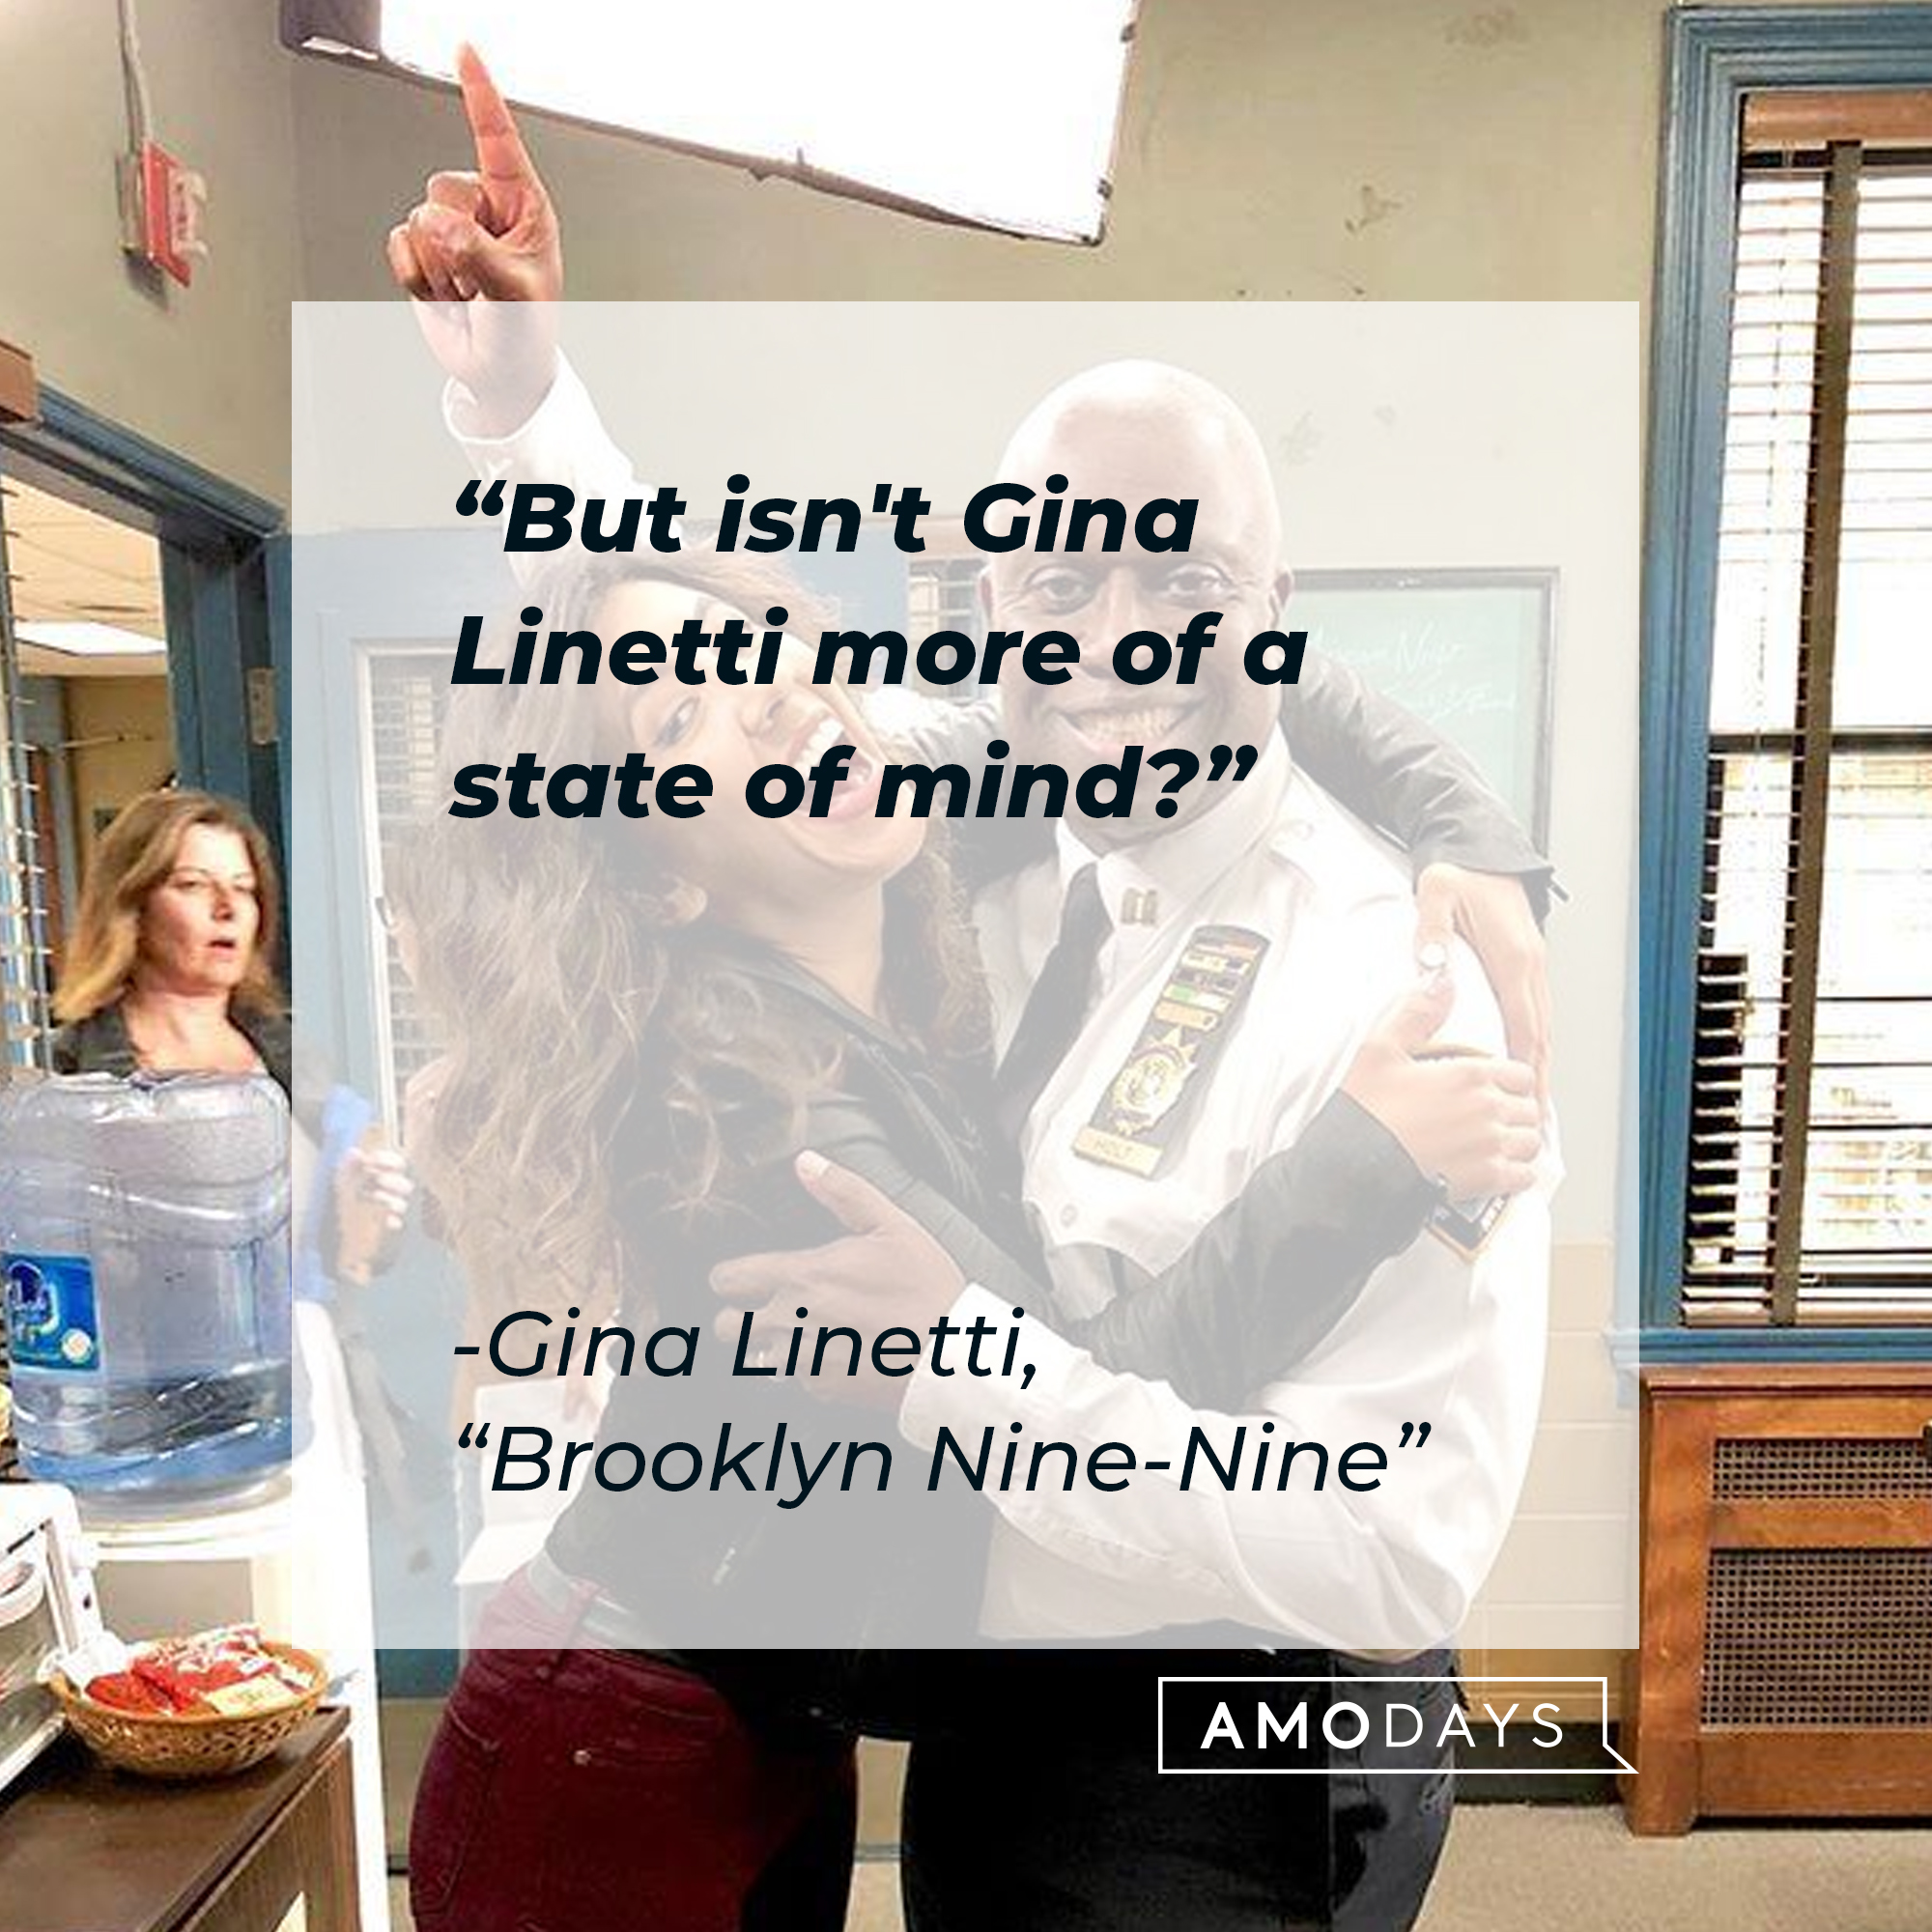 Gina Linetti with her quote: "But isn't Gina Linetti more of a state of mind?" | Source: Facebook.com/BrooklynNineNine